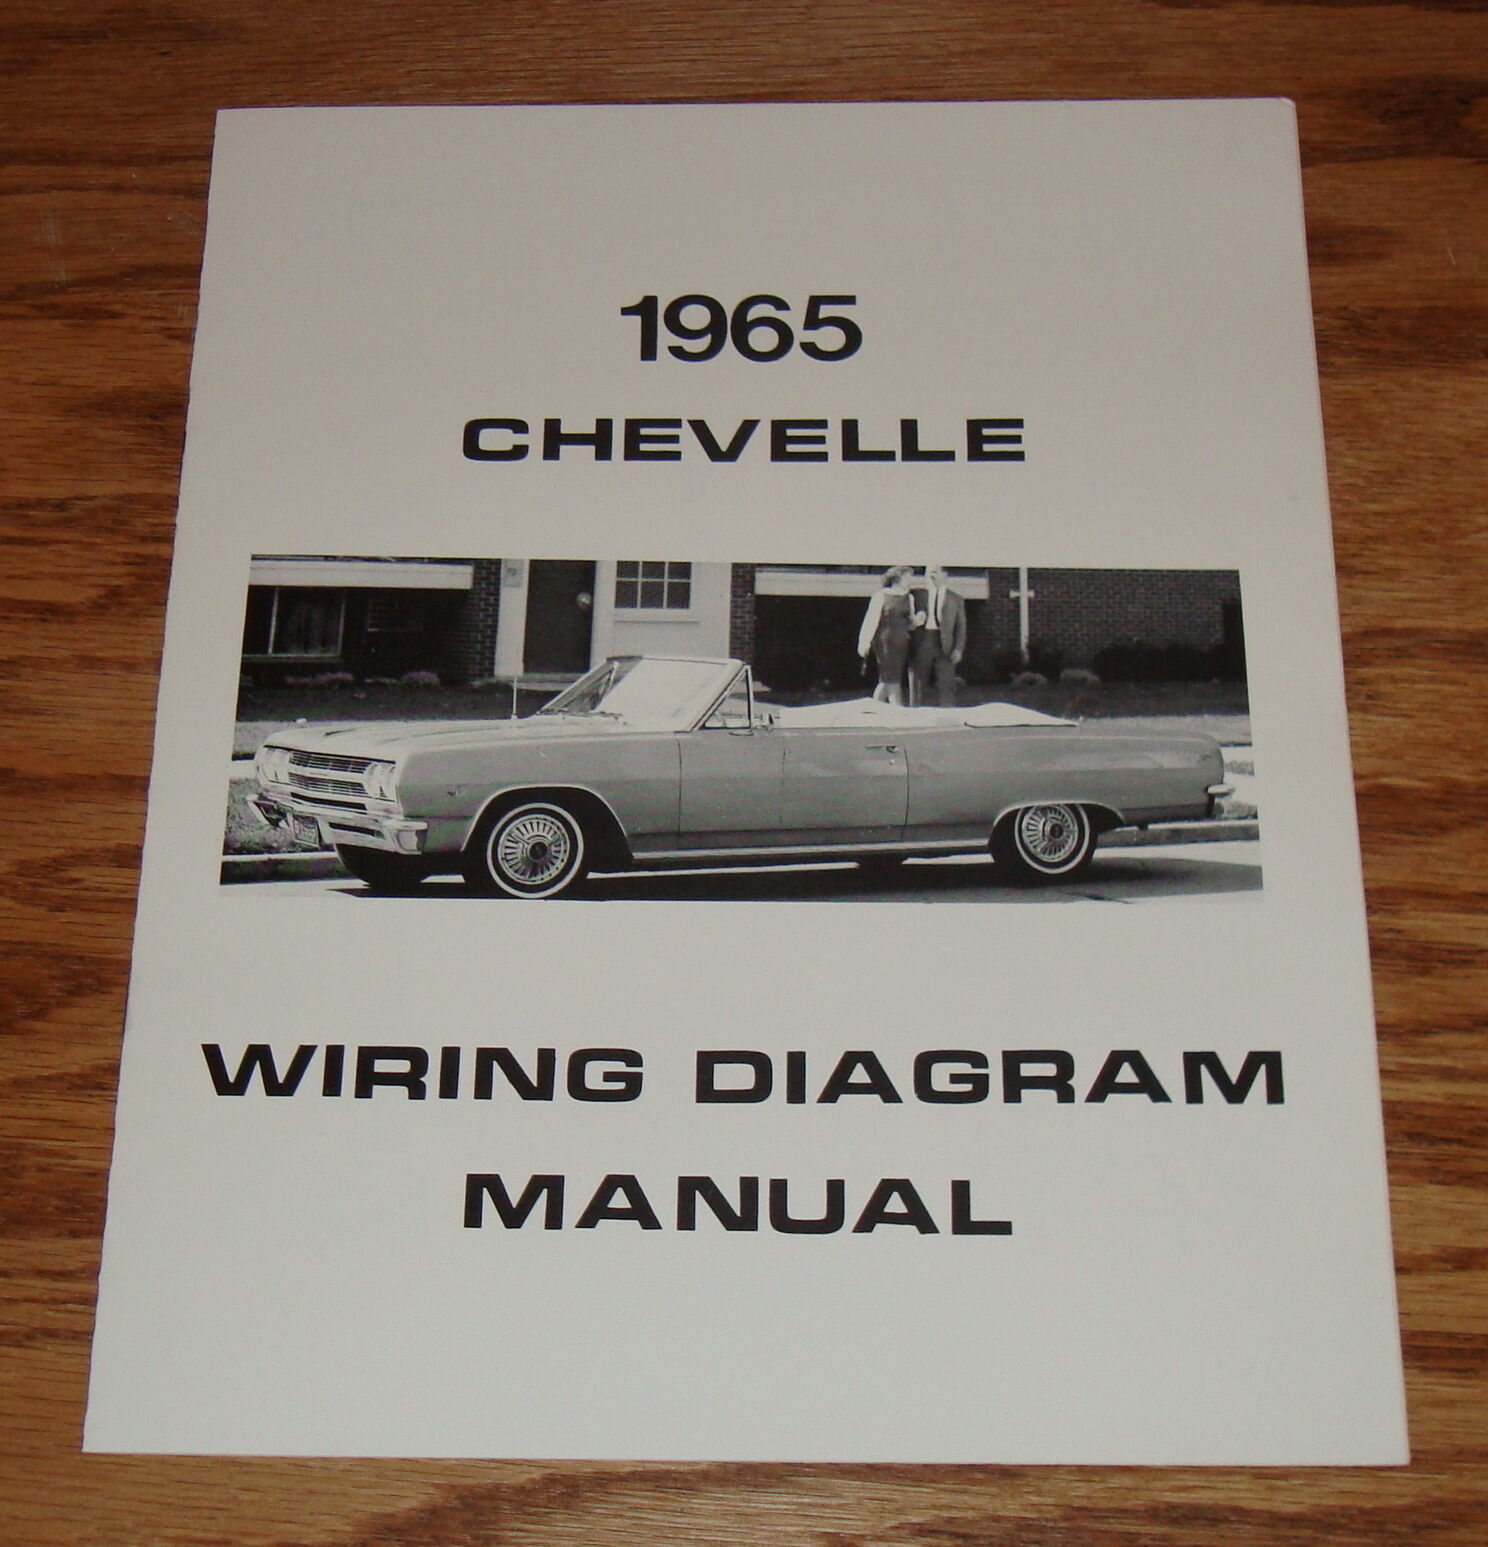 1965 Chevrolet Chevelle Wiring Diagram Manual 65 Chevy SS